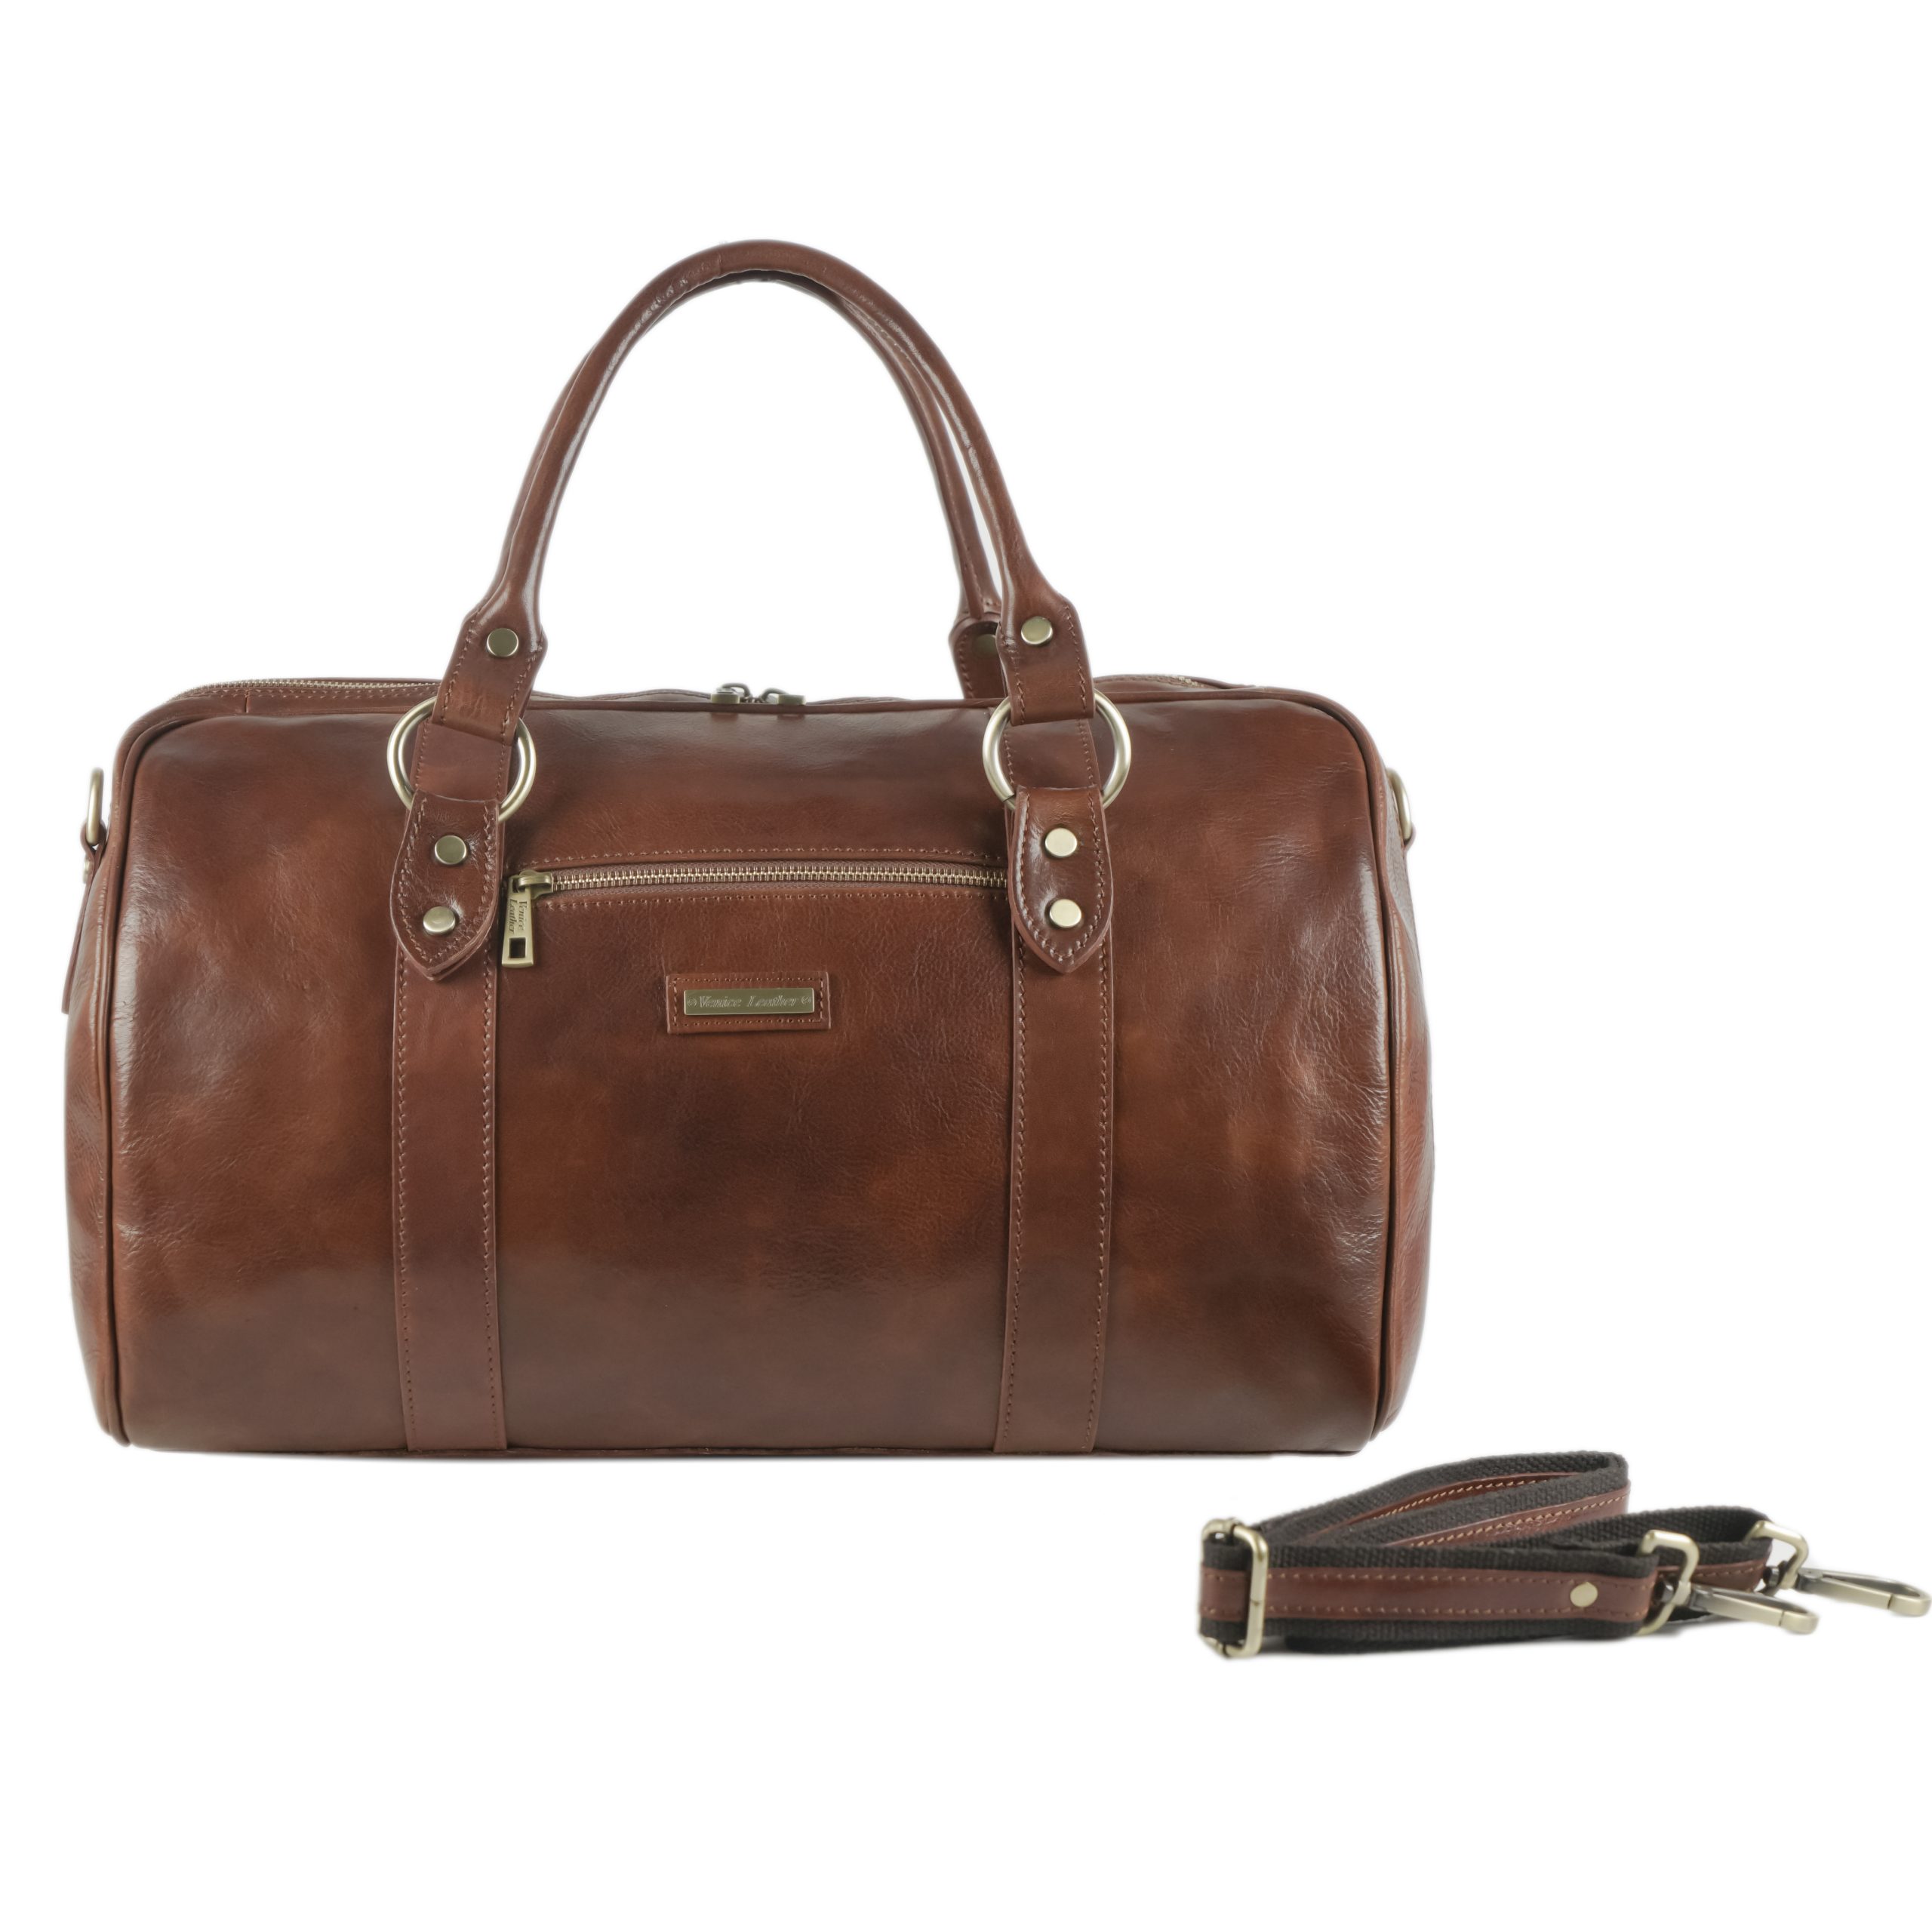 FIRENZE - Unisex leather hand luggage with shoulder strap and double metal  zip closure | Venice Leather